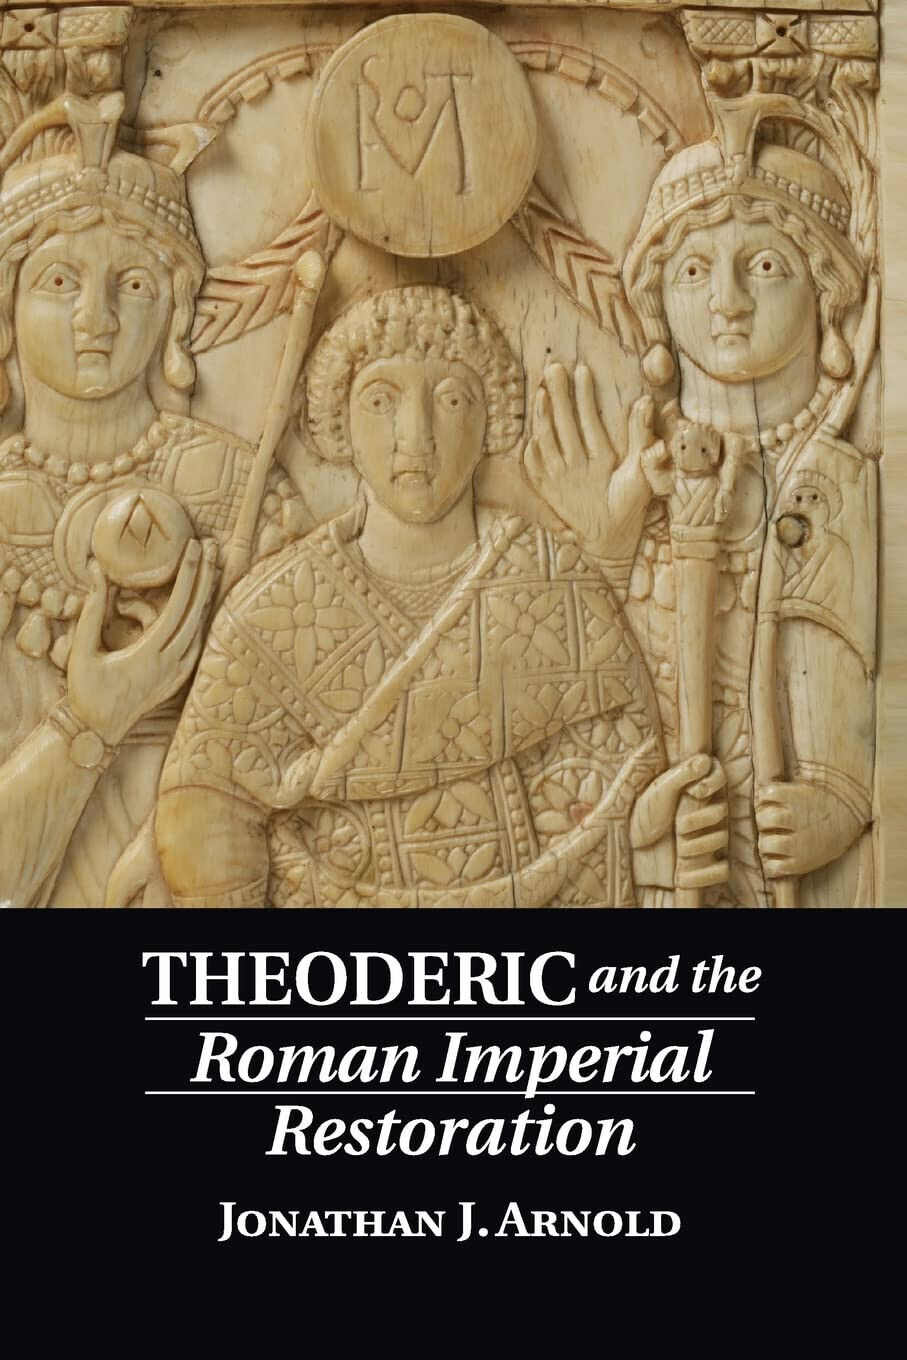 Theoderic and the Roman Imperial Restoration - Jonathan J. Arnold - 2022